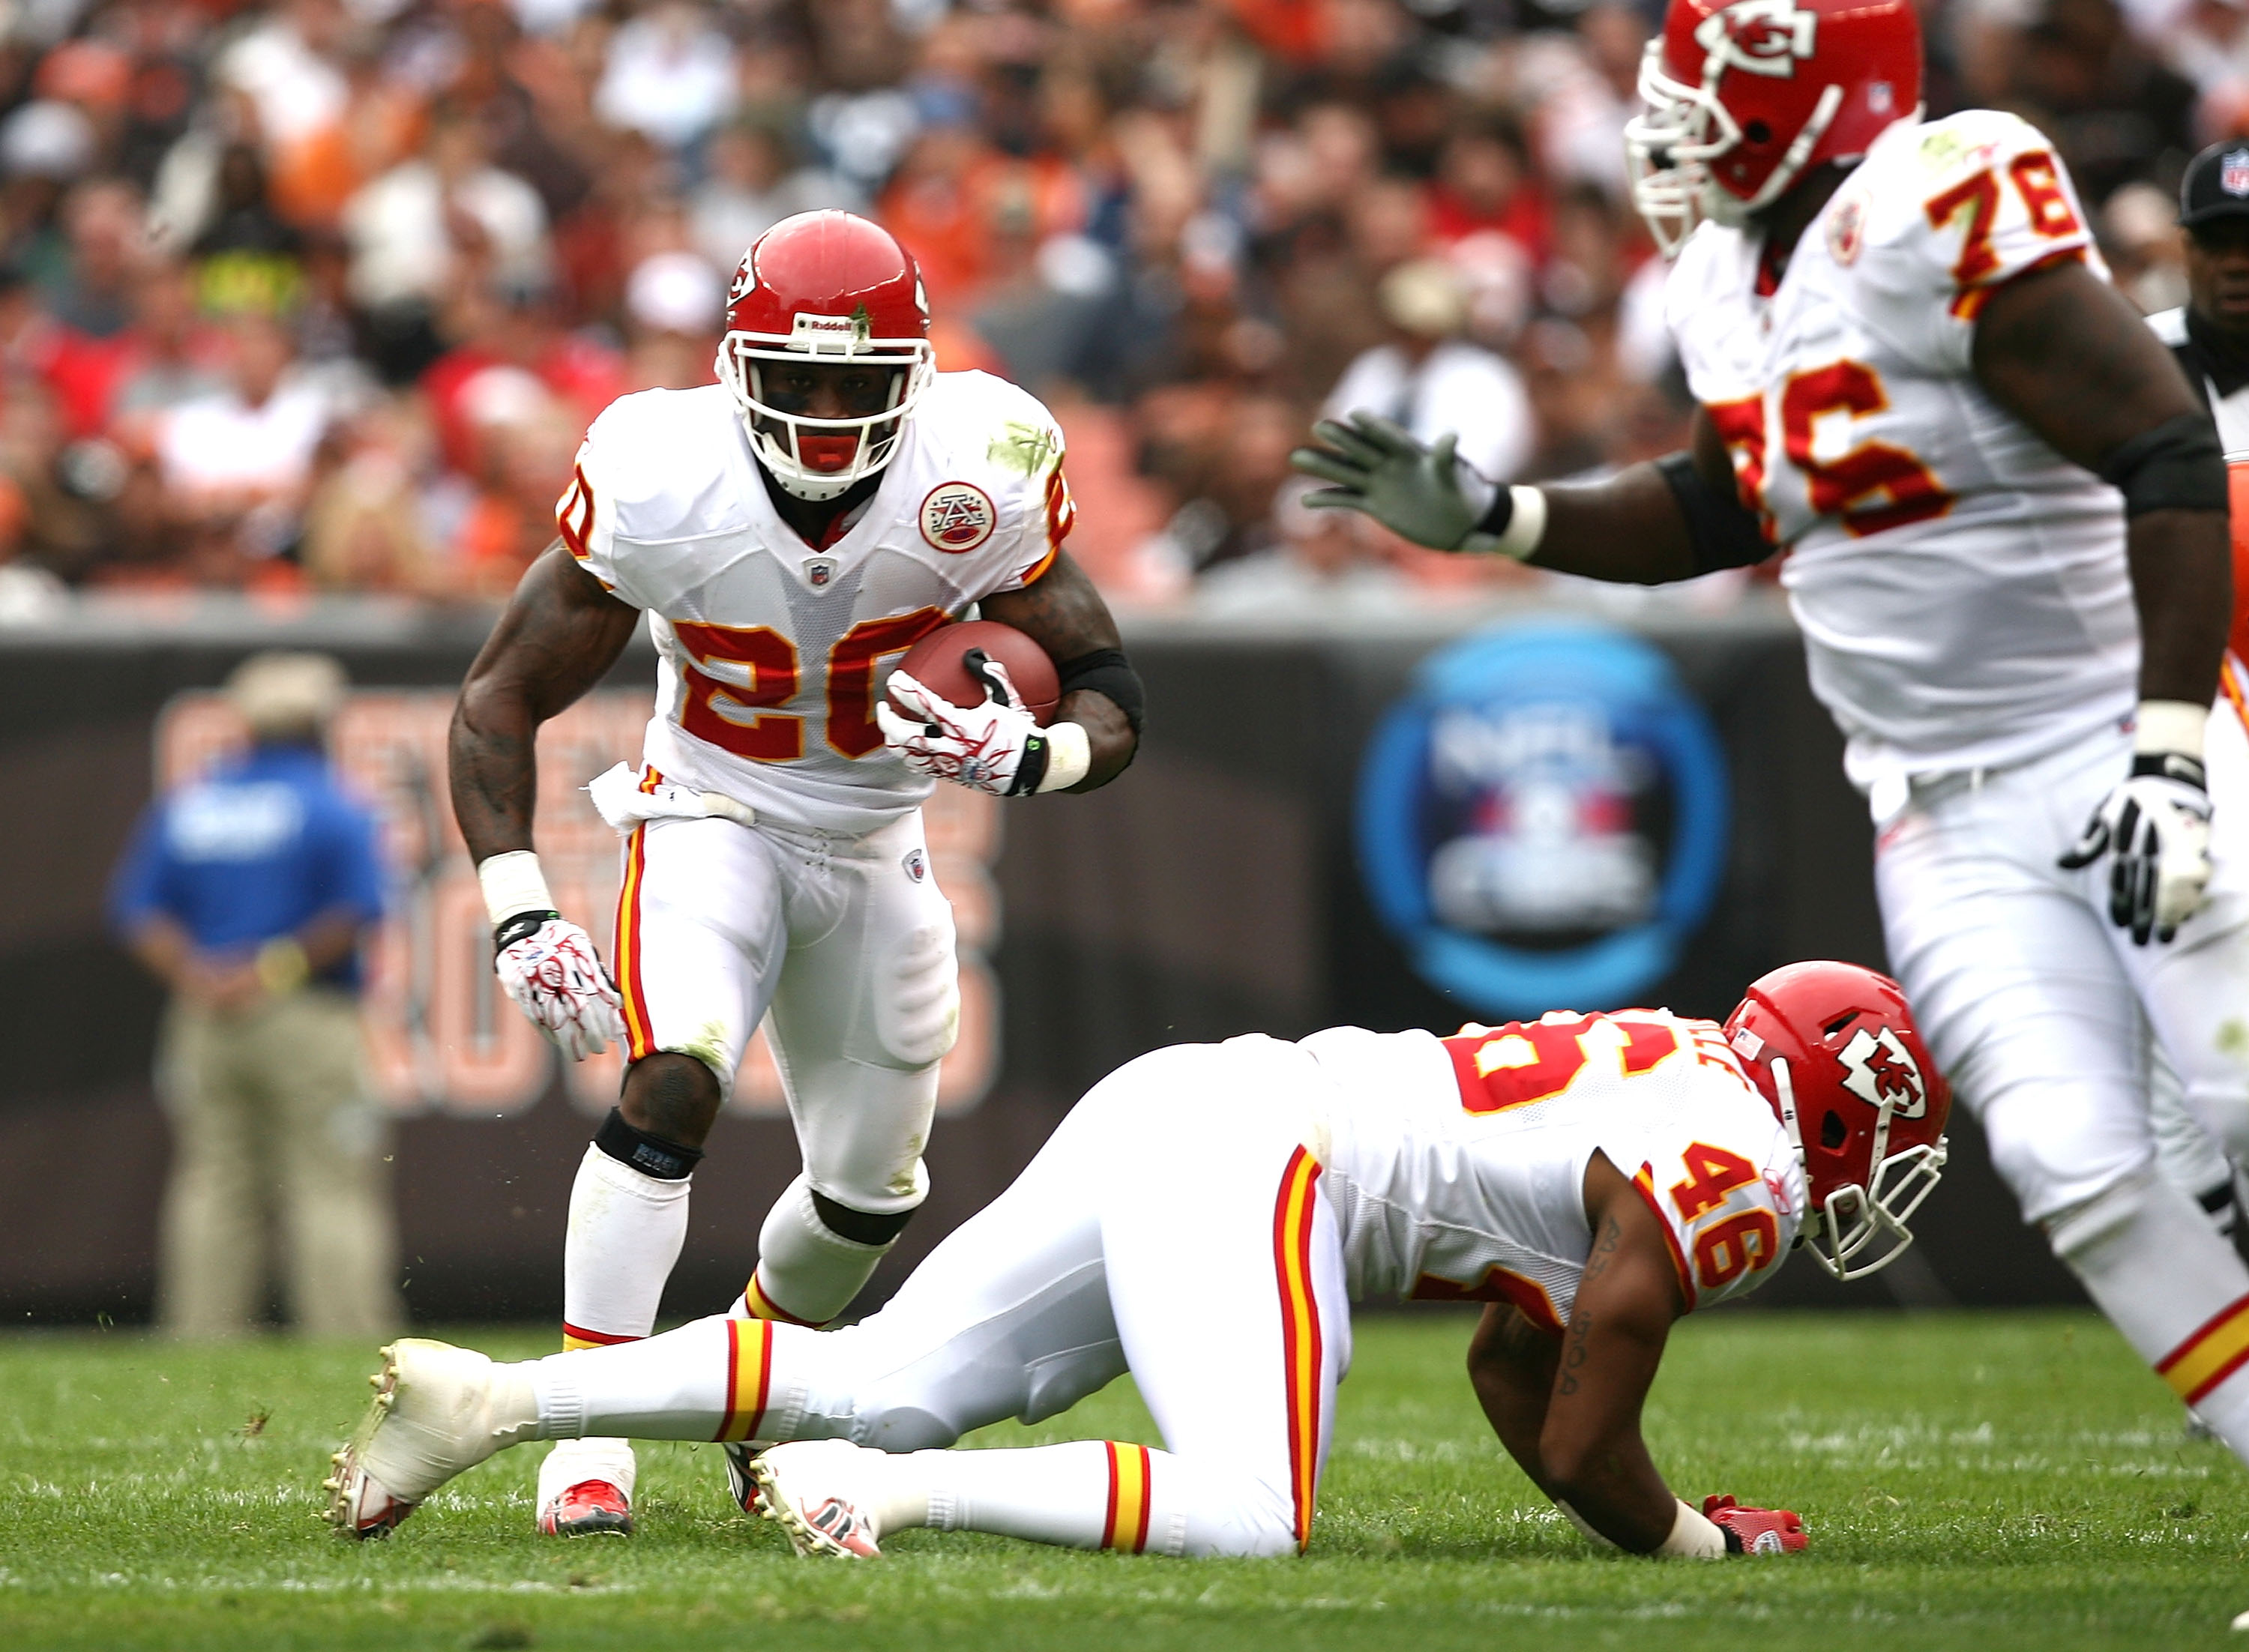 CLEVELAND - SEPTEMBER 19:  Running back Thomas Jones #20 of the Kansas City Chiefs gets a block from Tim Castille #46 and Branden Albert #76 against the Cleveland Browns at Cleveland Browns Stadium on September 19, 2010 in Cleveland, Ohio.  (Photo by Matt